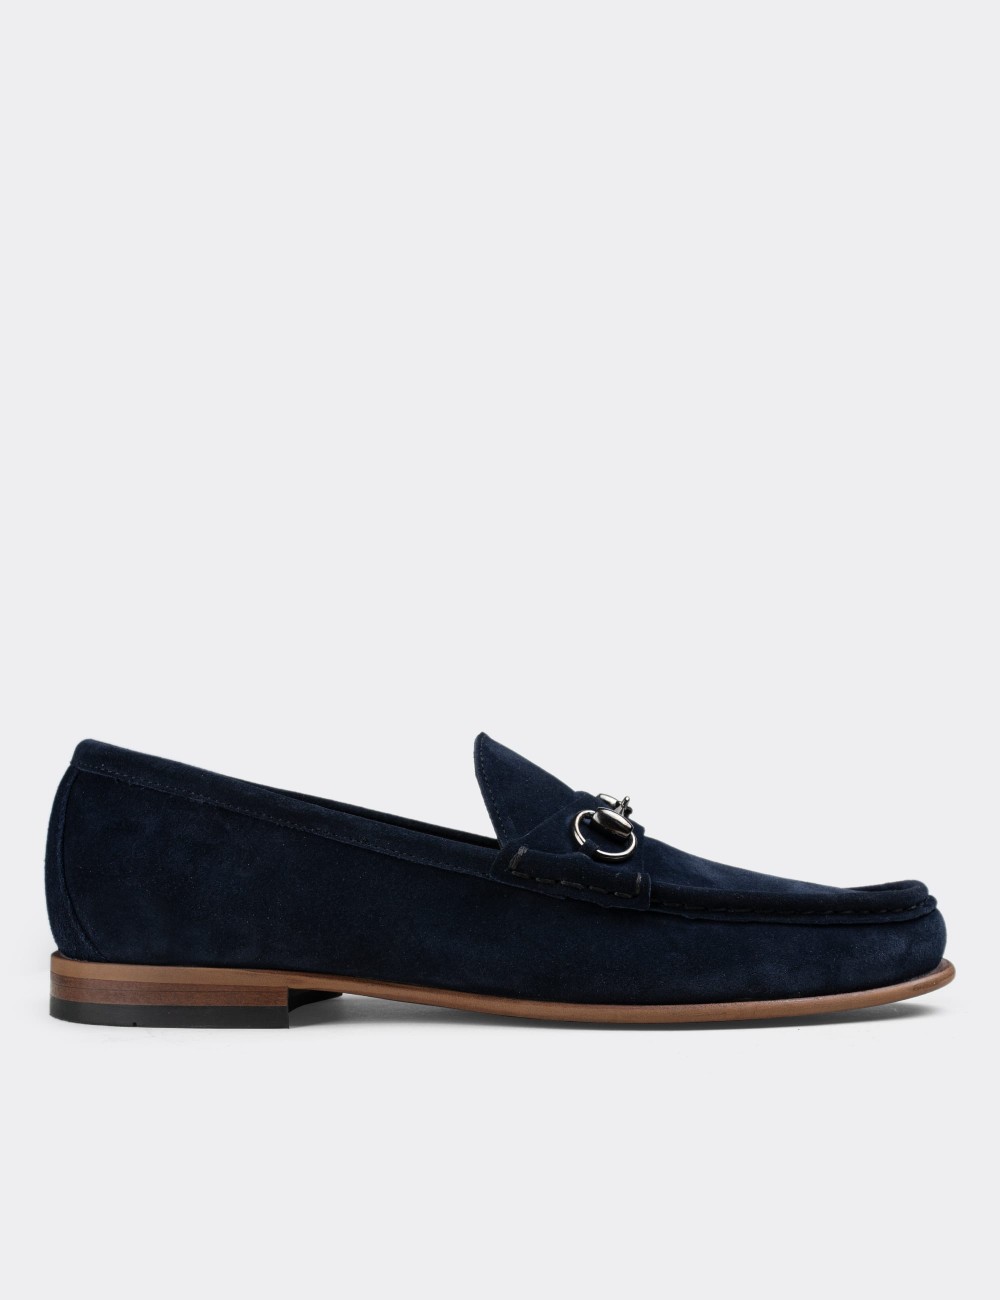 Navy Suede Leather Loafers - 01649MLCVM01